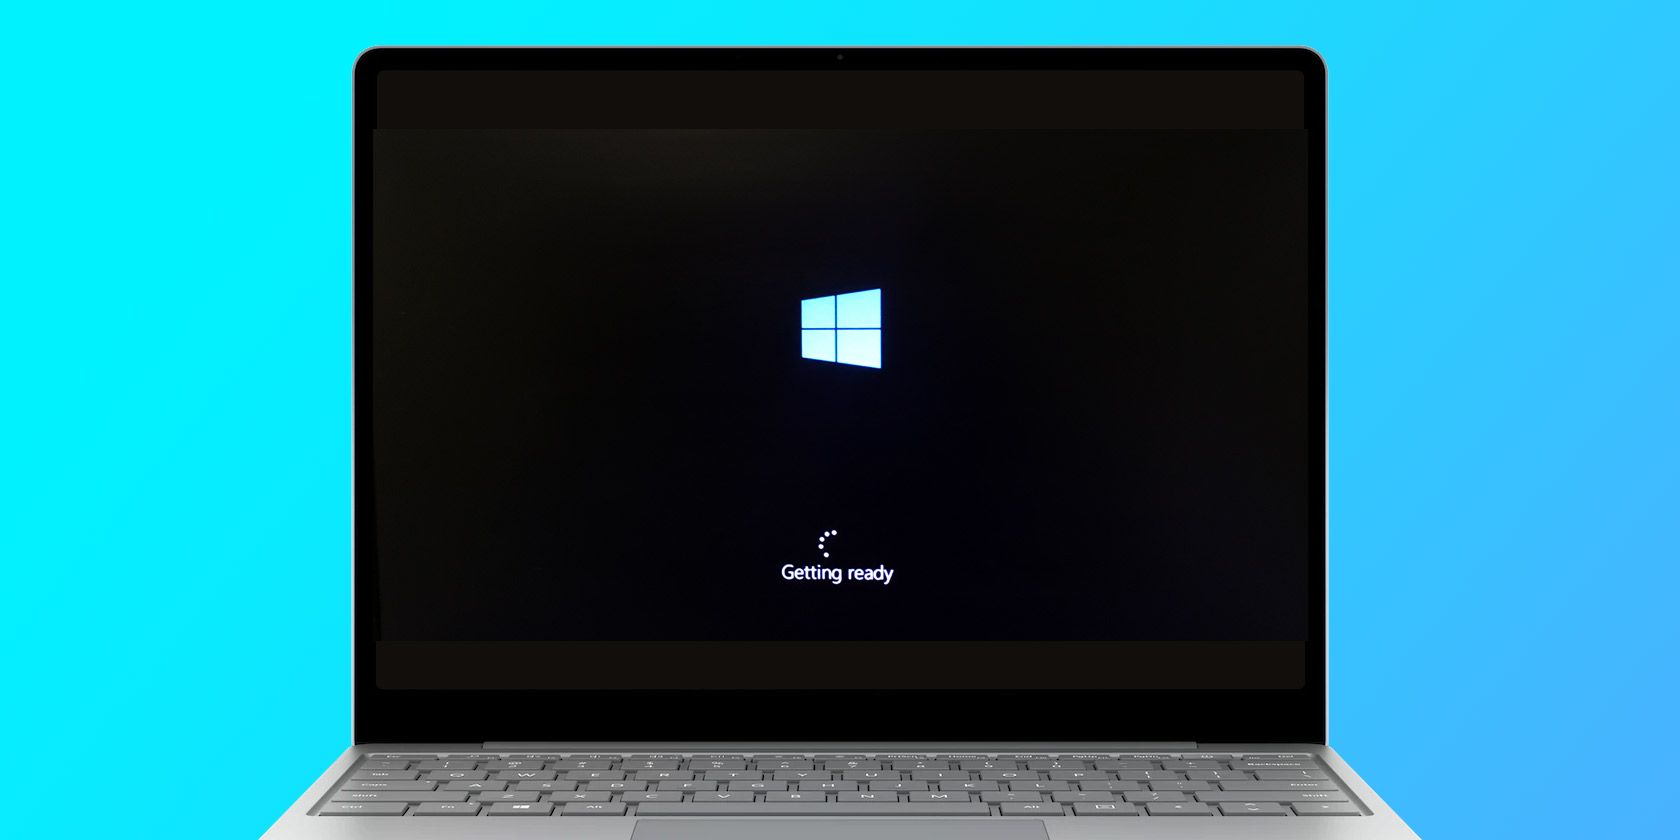 windows 10 stuck on picture screen